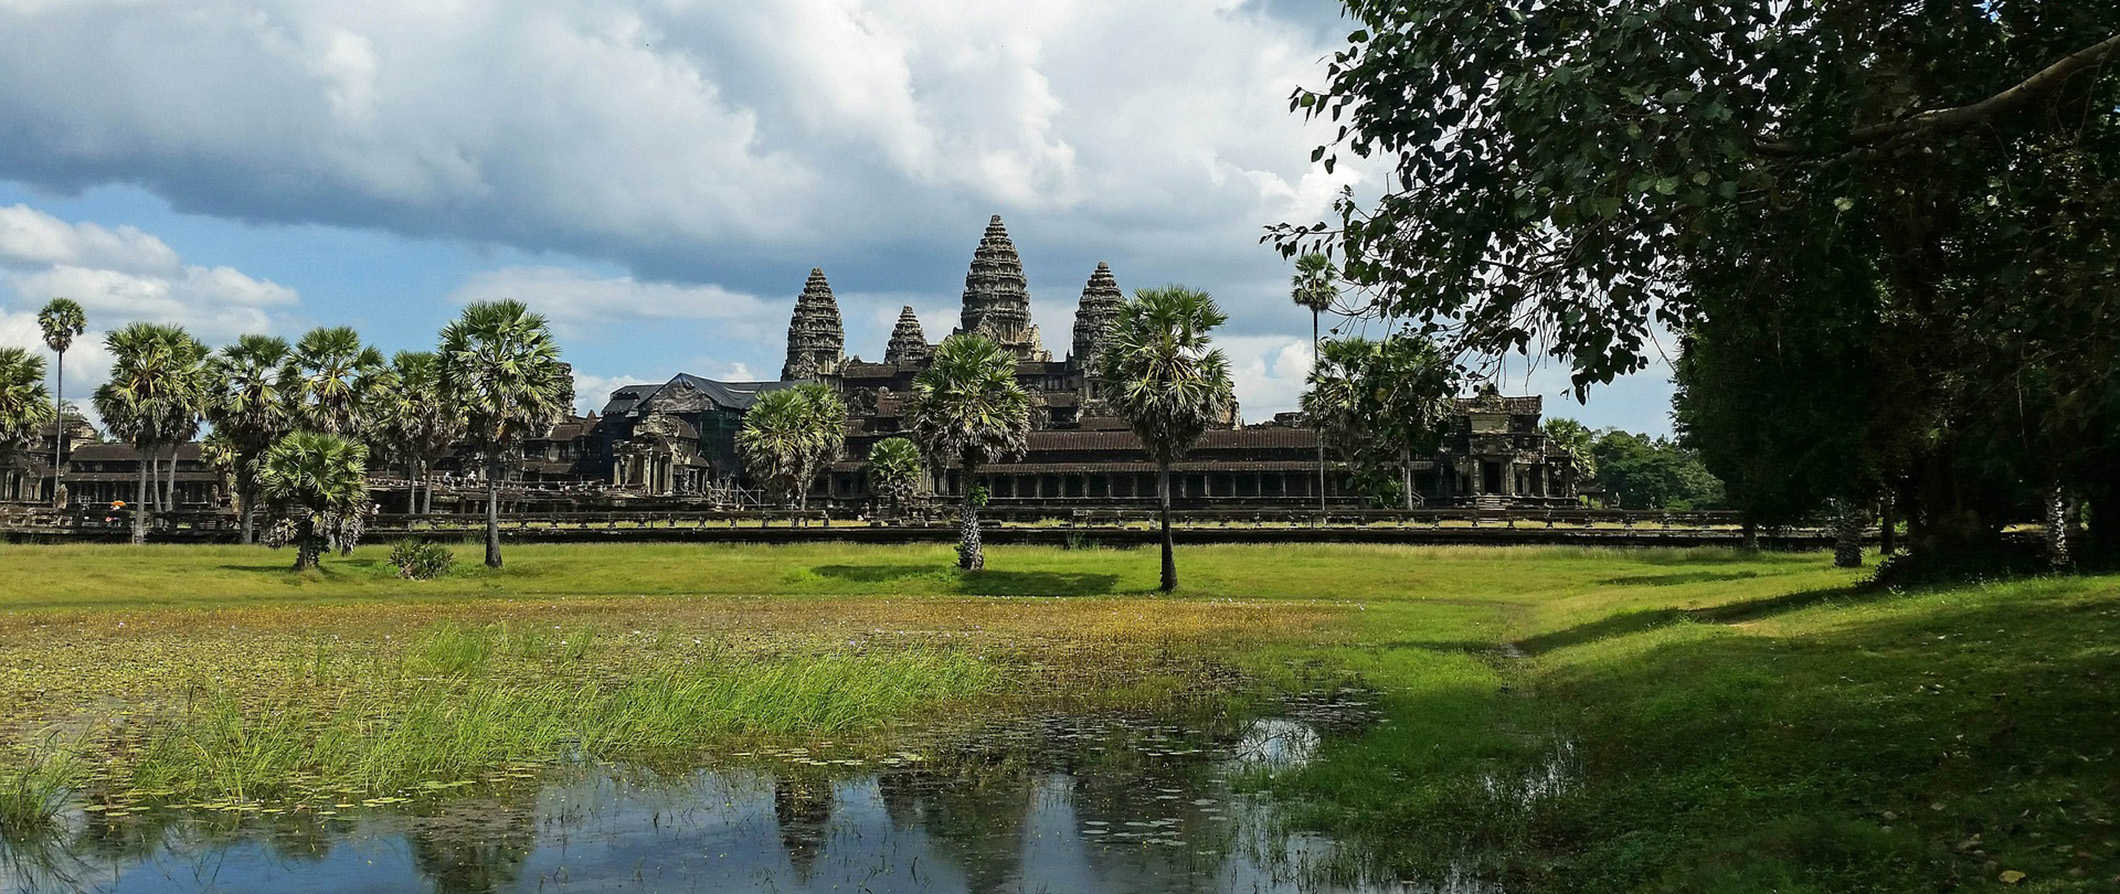 The historic Angkor Wat temple complex in Cambodia reflected in calm waters